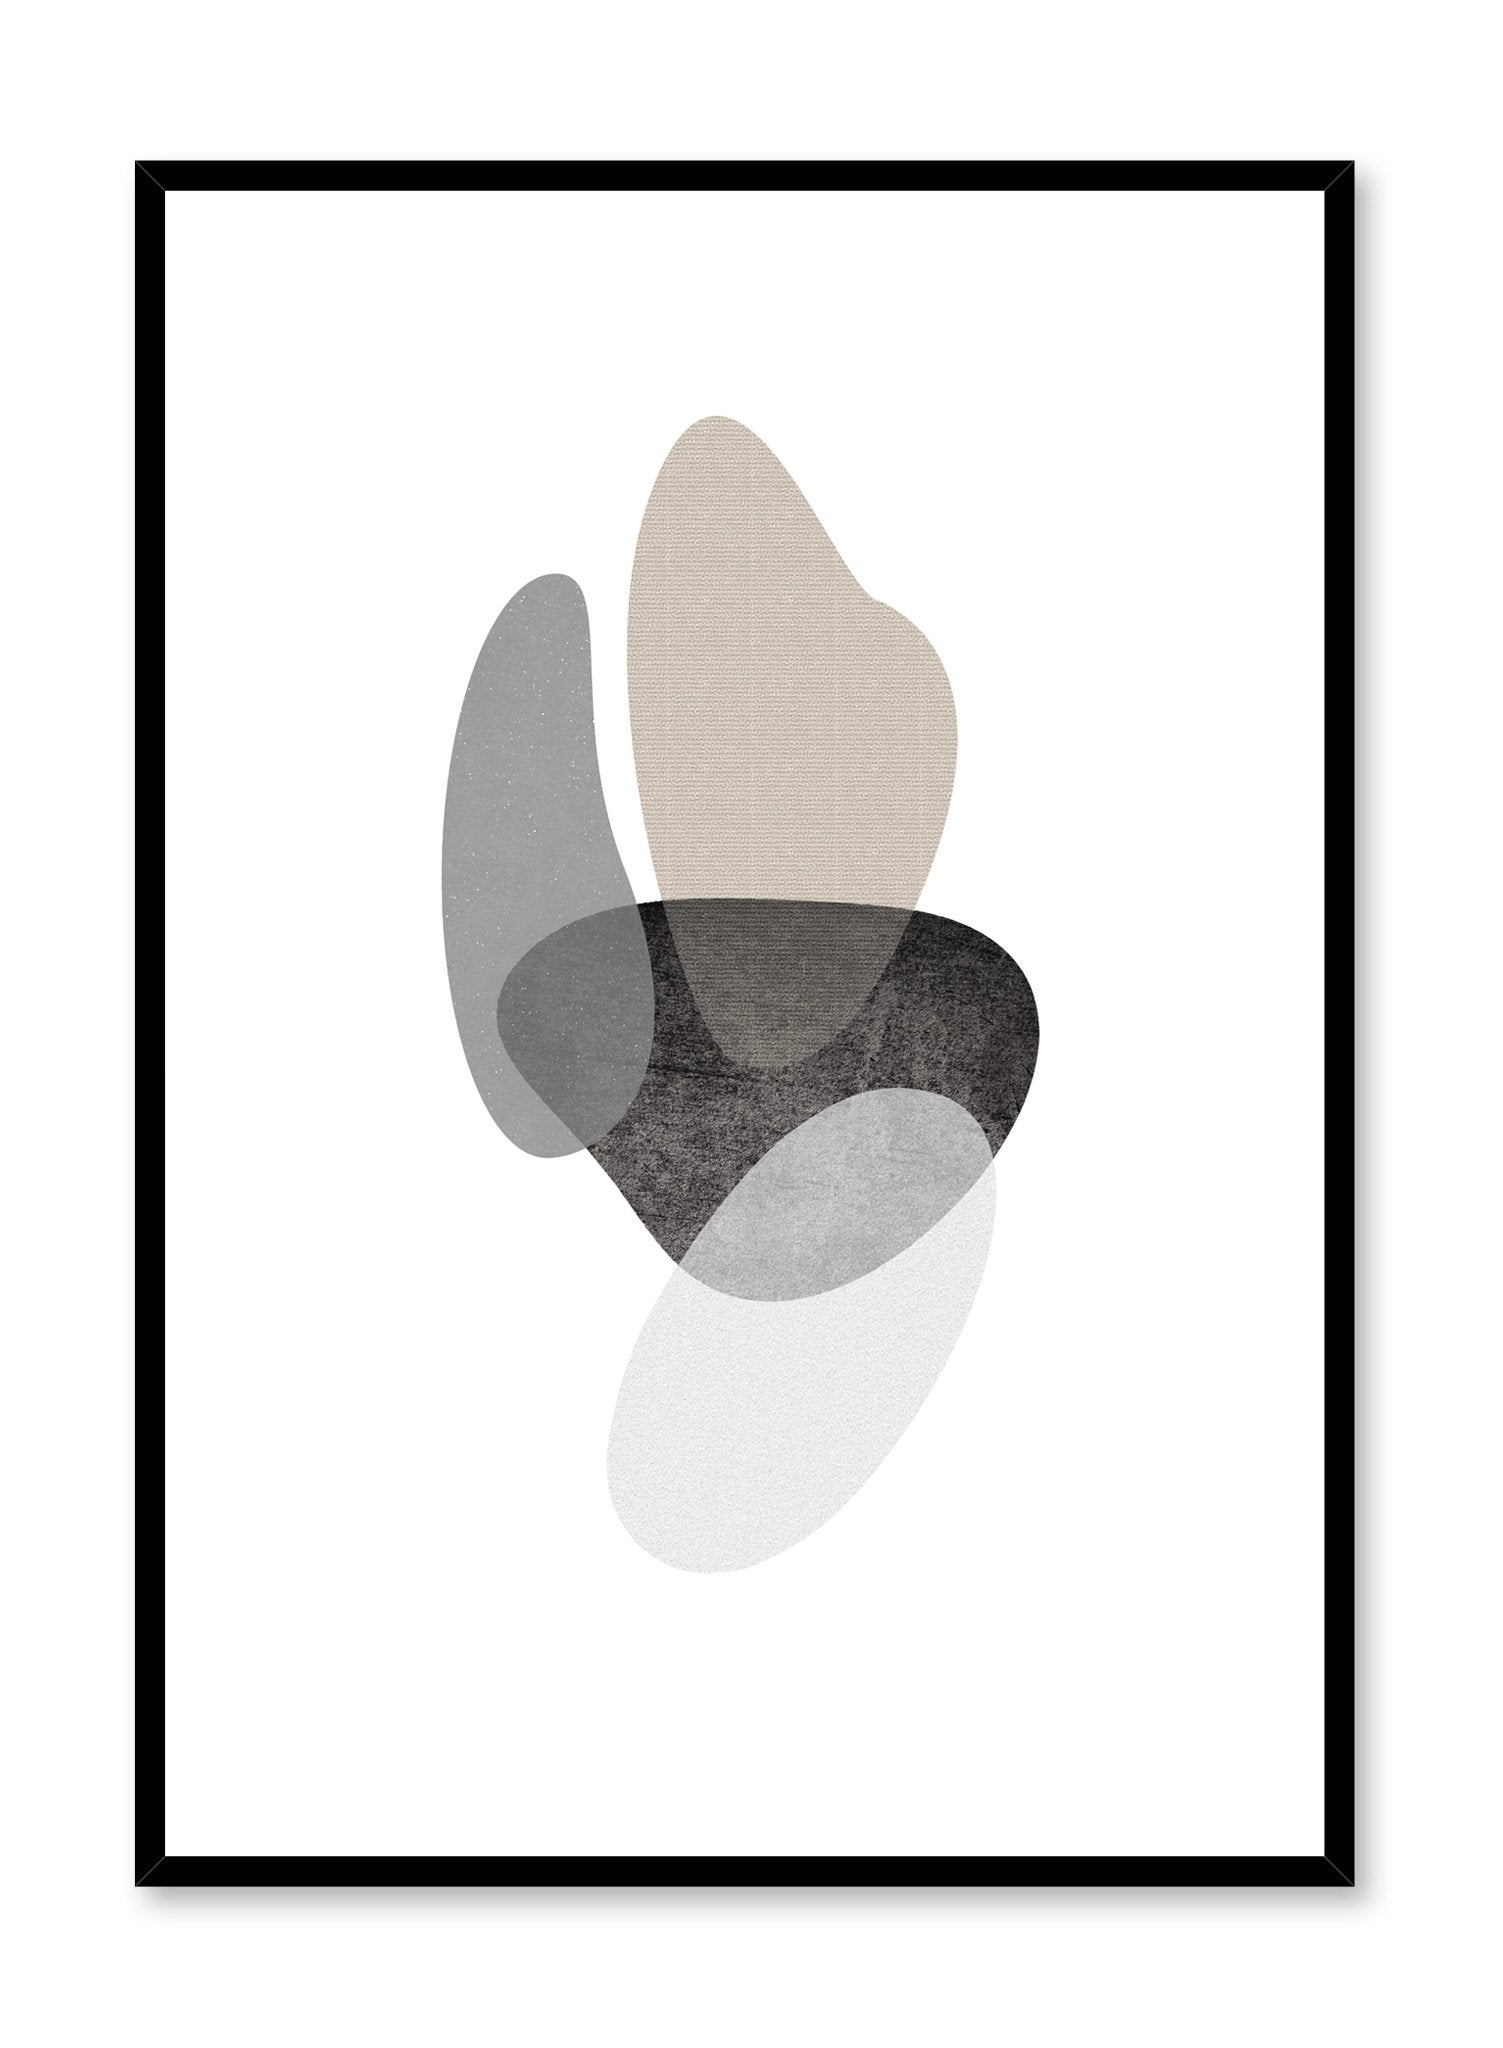 Modern minimalist poster by Opposite Wall with abstract graphic design Shapes No. 2